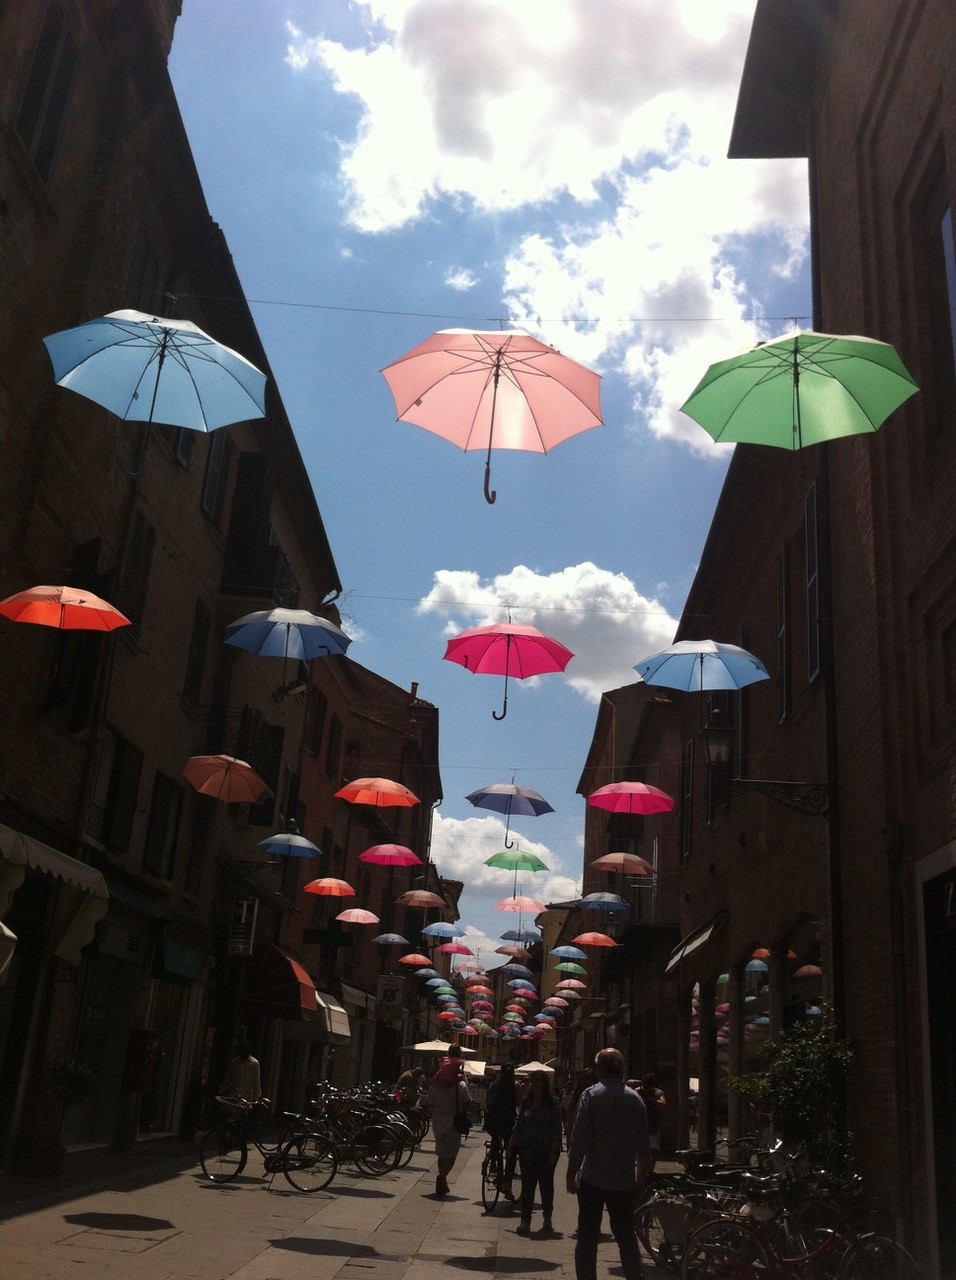 Umbrellas in the sky in an alley in Italy